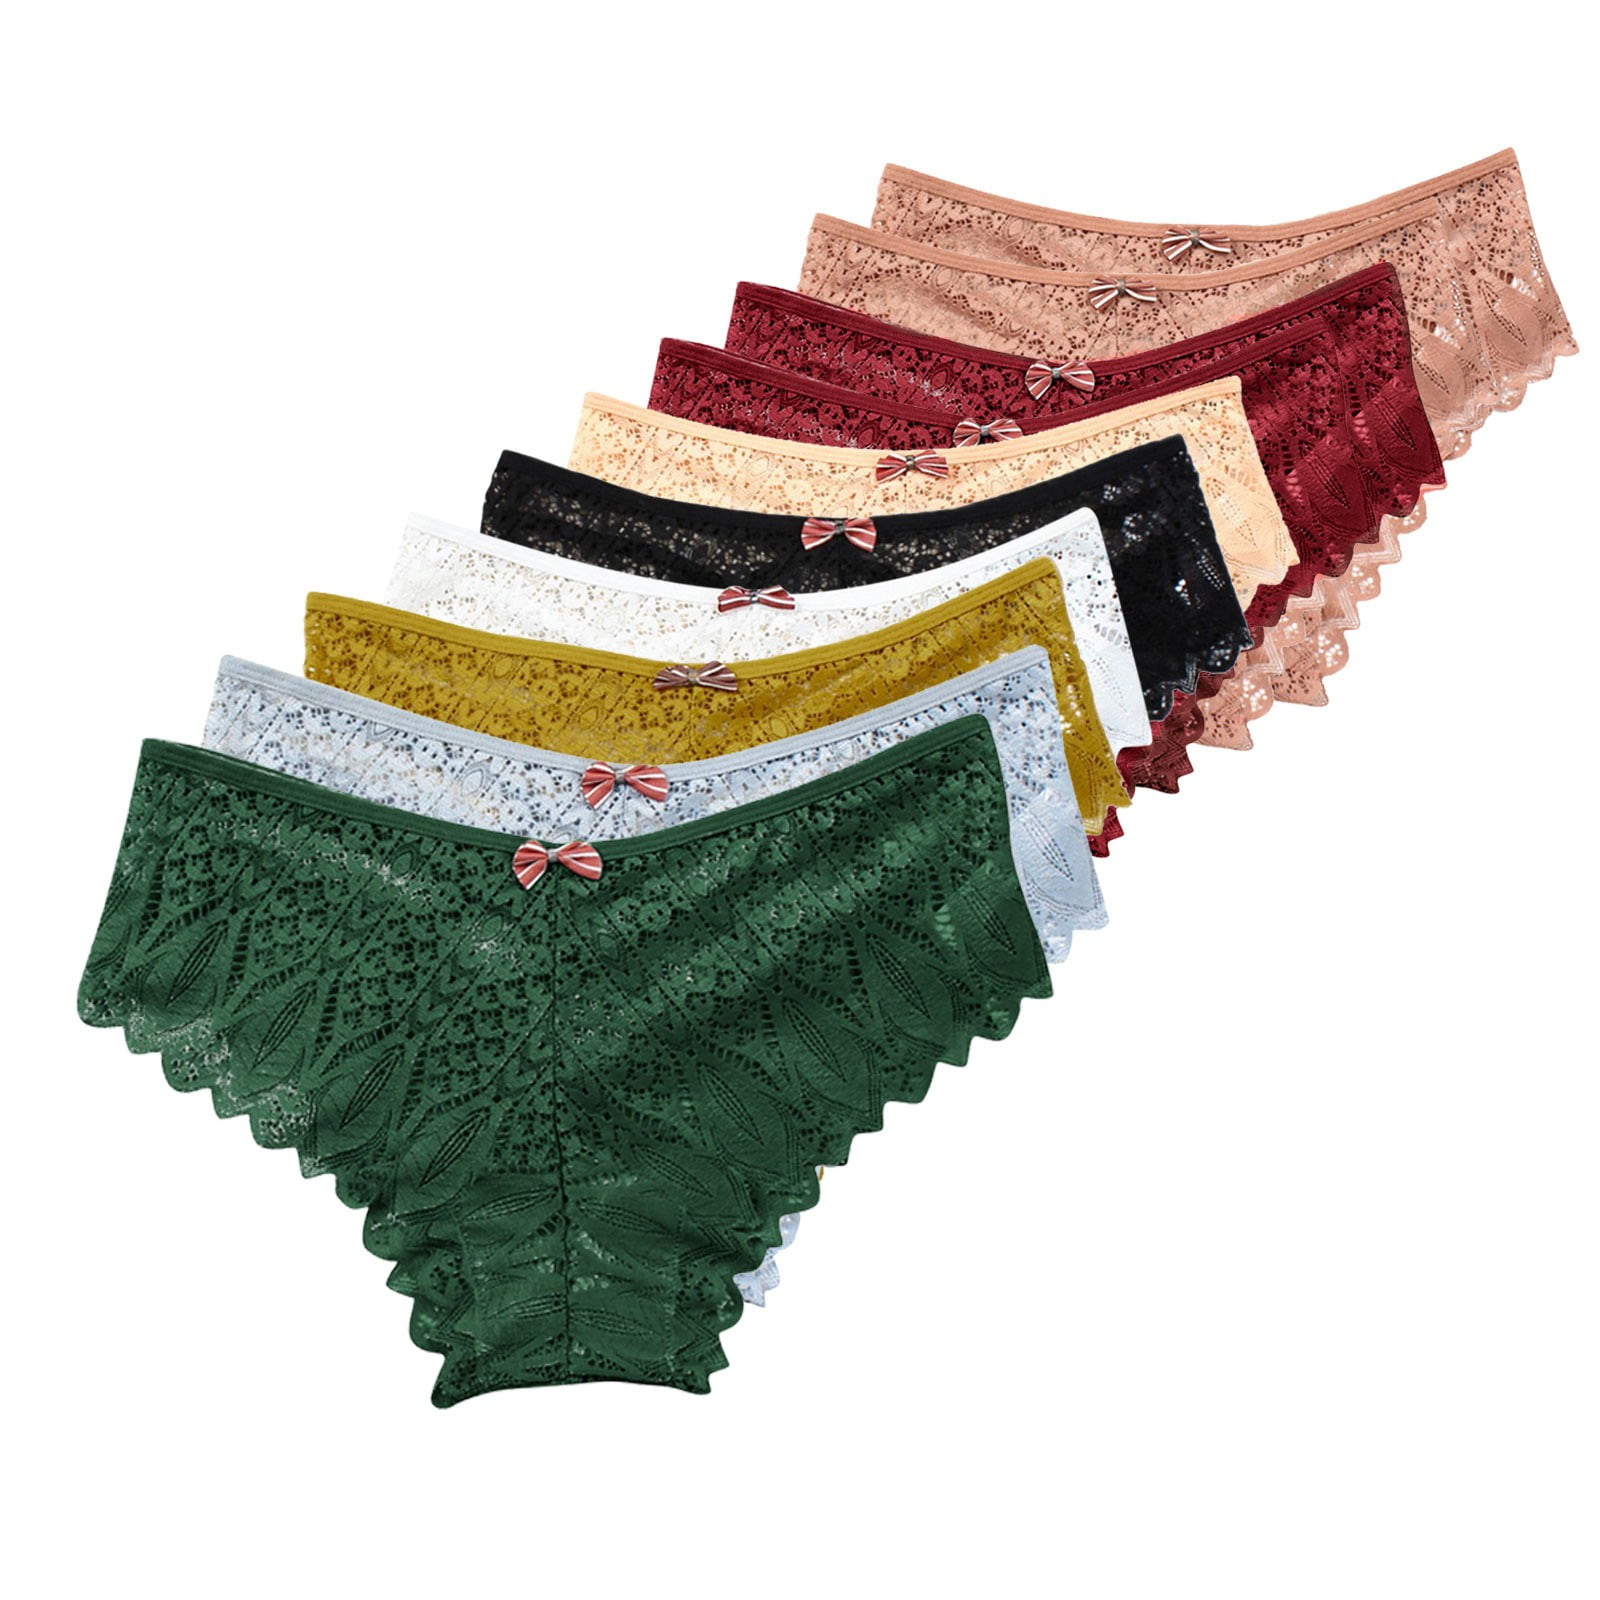 ZMHEGW 12 Packs Womens Underwear Tummy Control Crochet Lace Lace Up Panty  Hollow Out Panties 